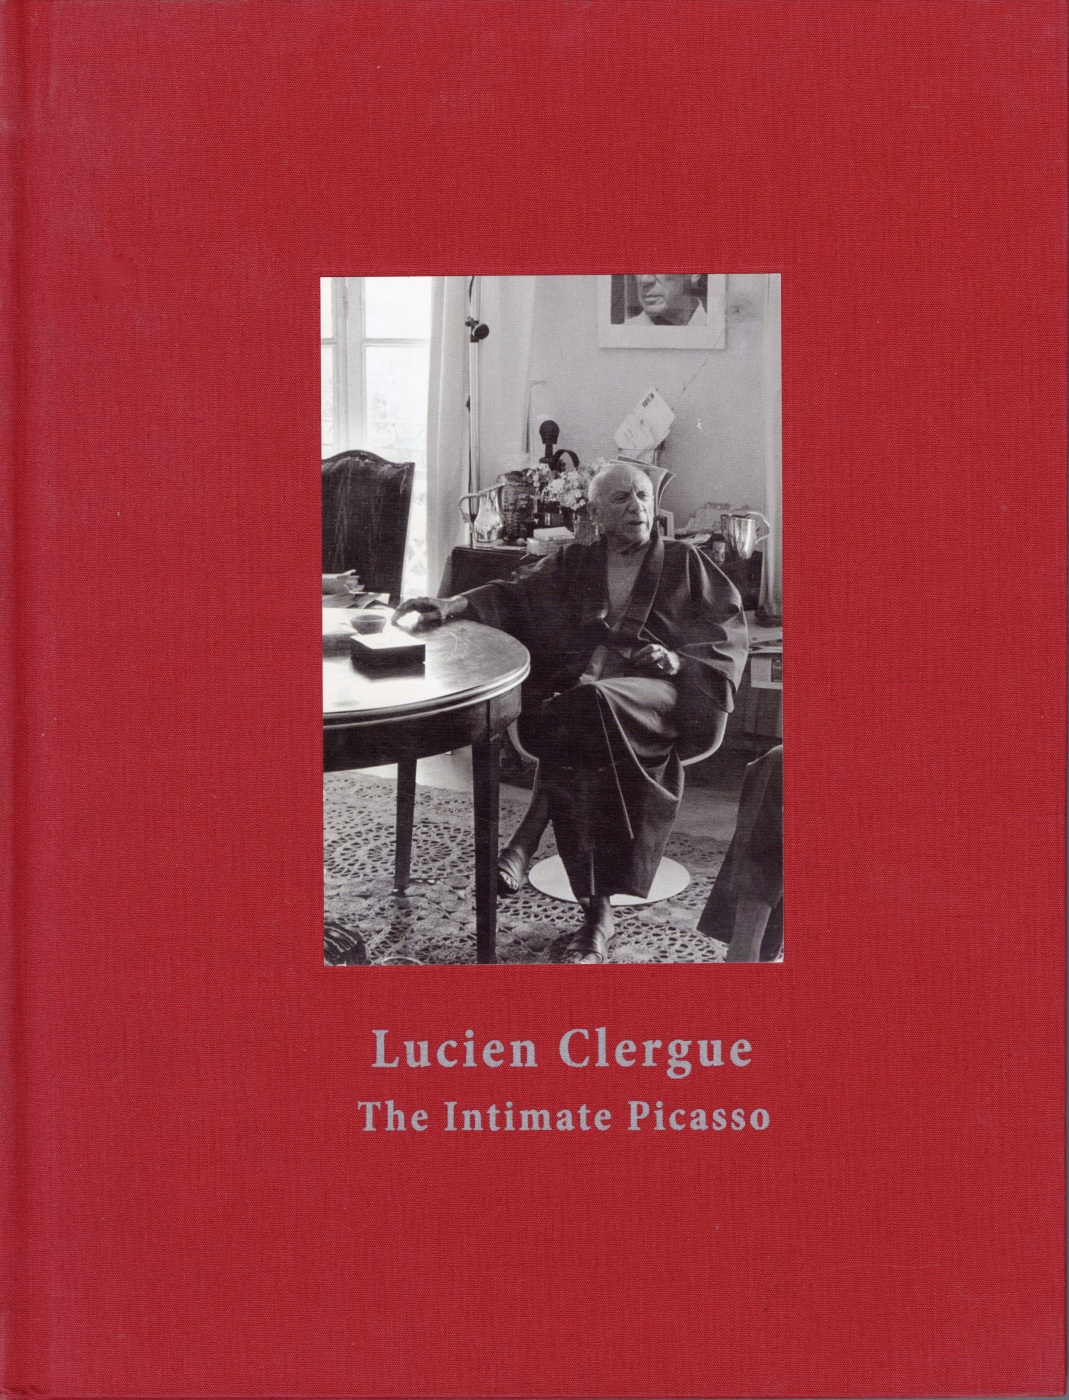 Lucien Clergue: The Intimate Picasso - Publications - Louis Stern Fine Arts